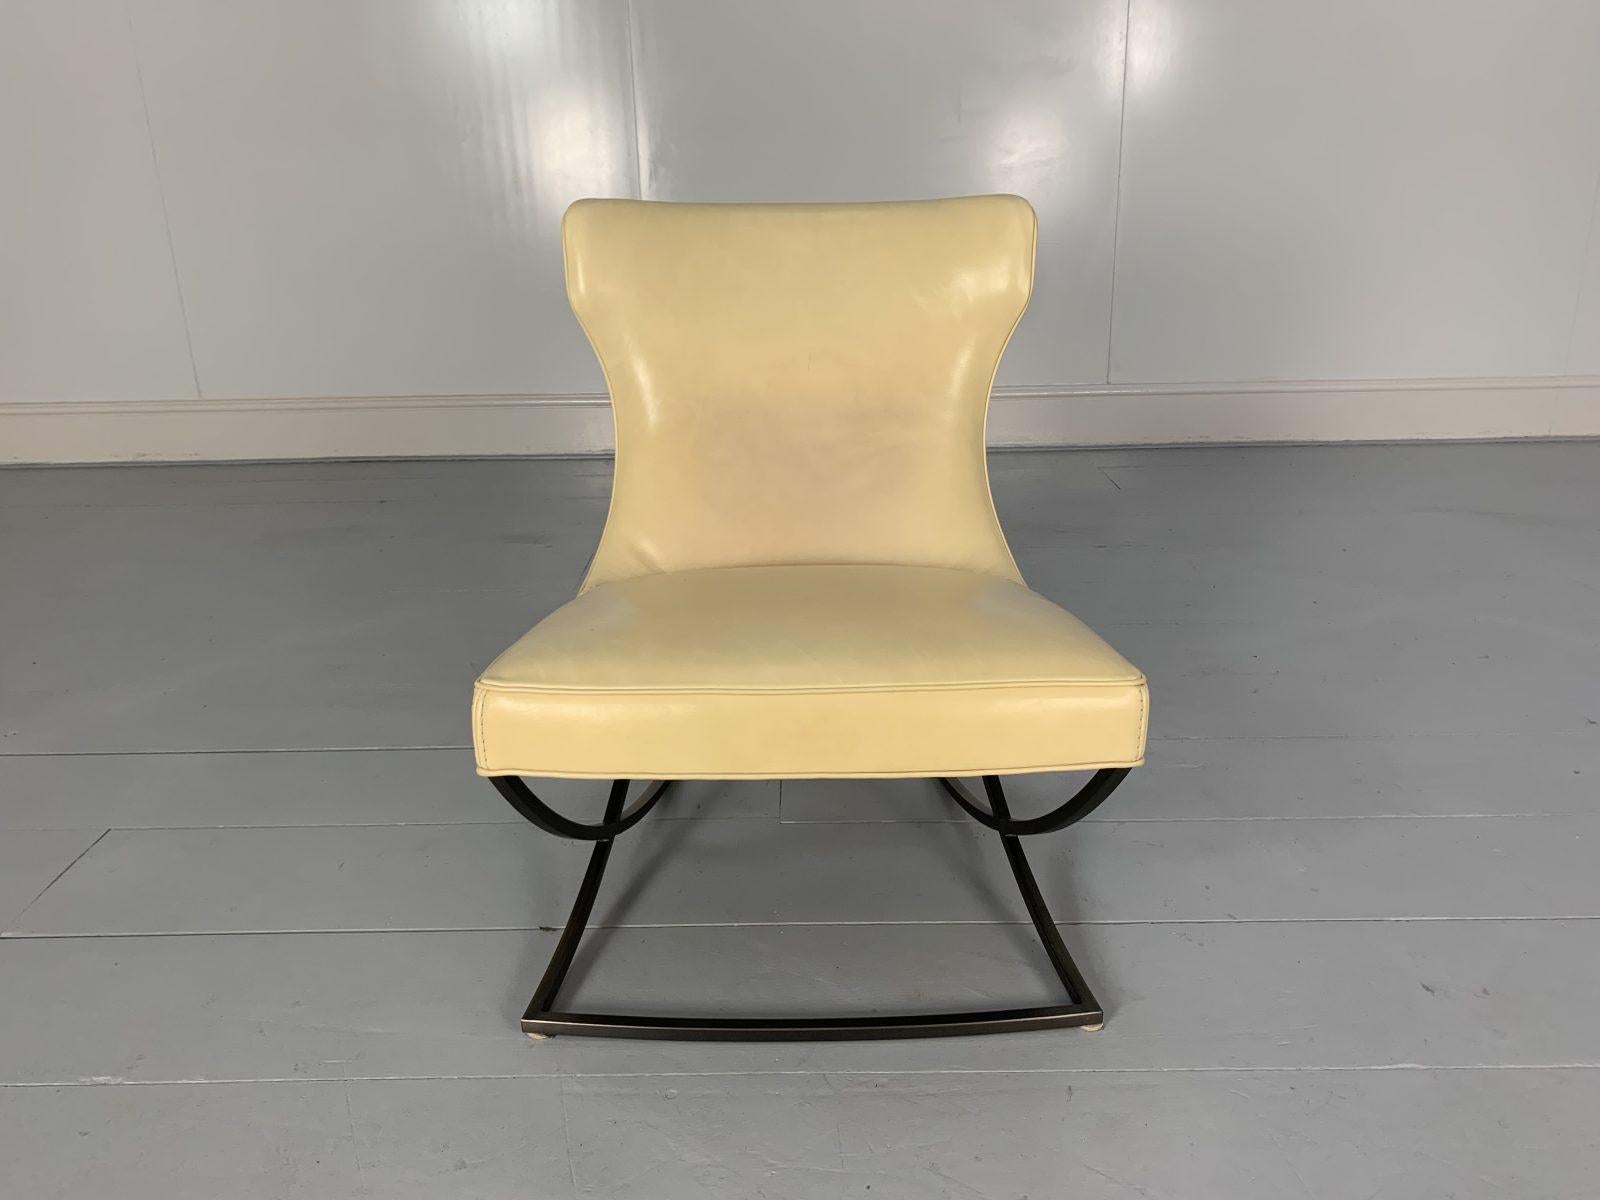 Pair of Baxter “Paloma” Chairs, in Cream Leather For Sale 2